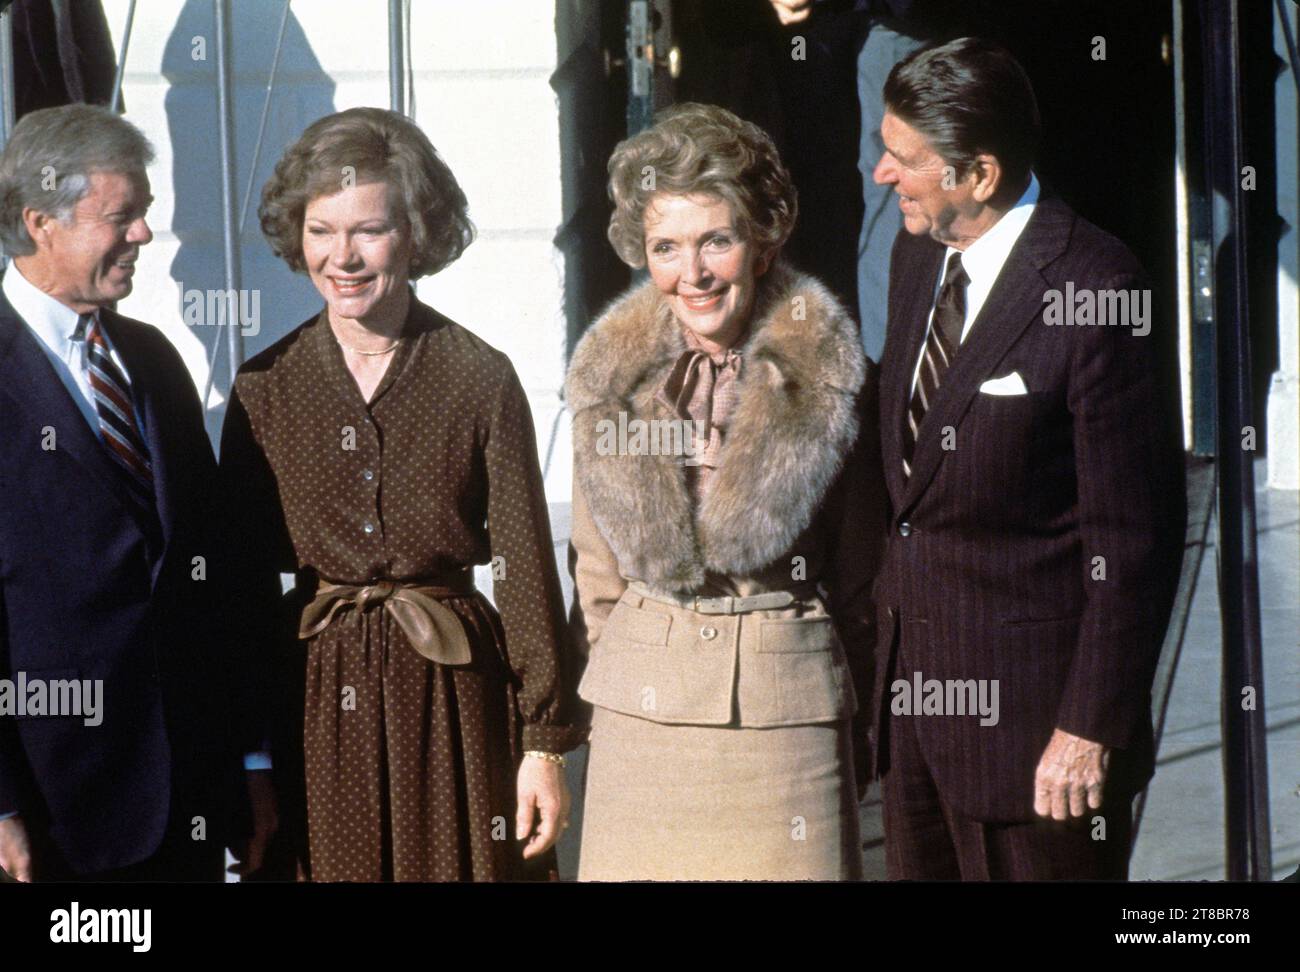 **FILE PHOTO** Rosalynn Carter Has Passed Away. United States President Jimmy Carter, left, poses for a group photo with US President-elect Ronald Reagan, right, and their wives, former first lady Rosalynn Carter, left center and Nancy Reagan, right center, on the South Portico of the White House in Washington, DC on Thursday, November 20, 1980. Copyright: xArniexSachsx/xCNPx/MediaPunchx Credit: Imago/Alamy Live News Stock Photo